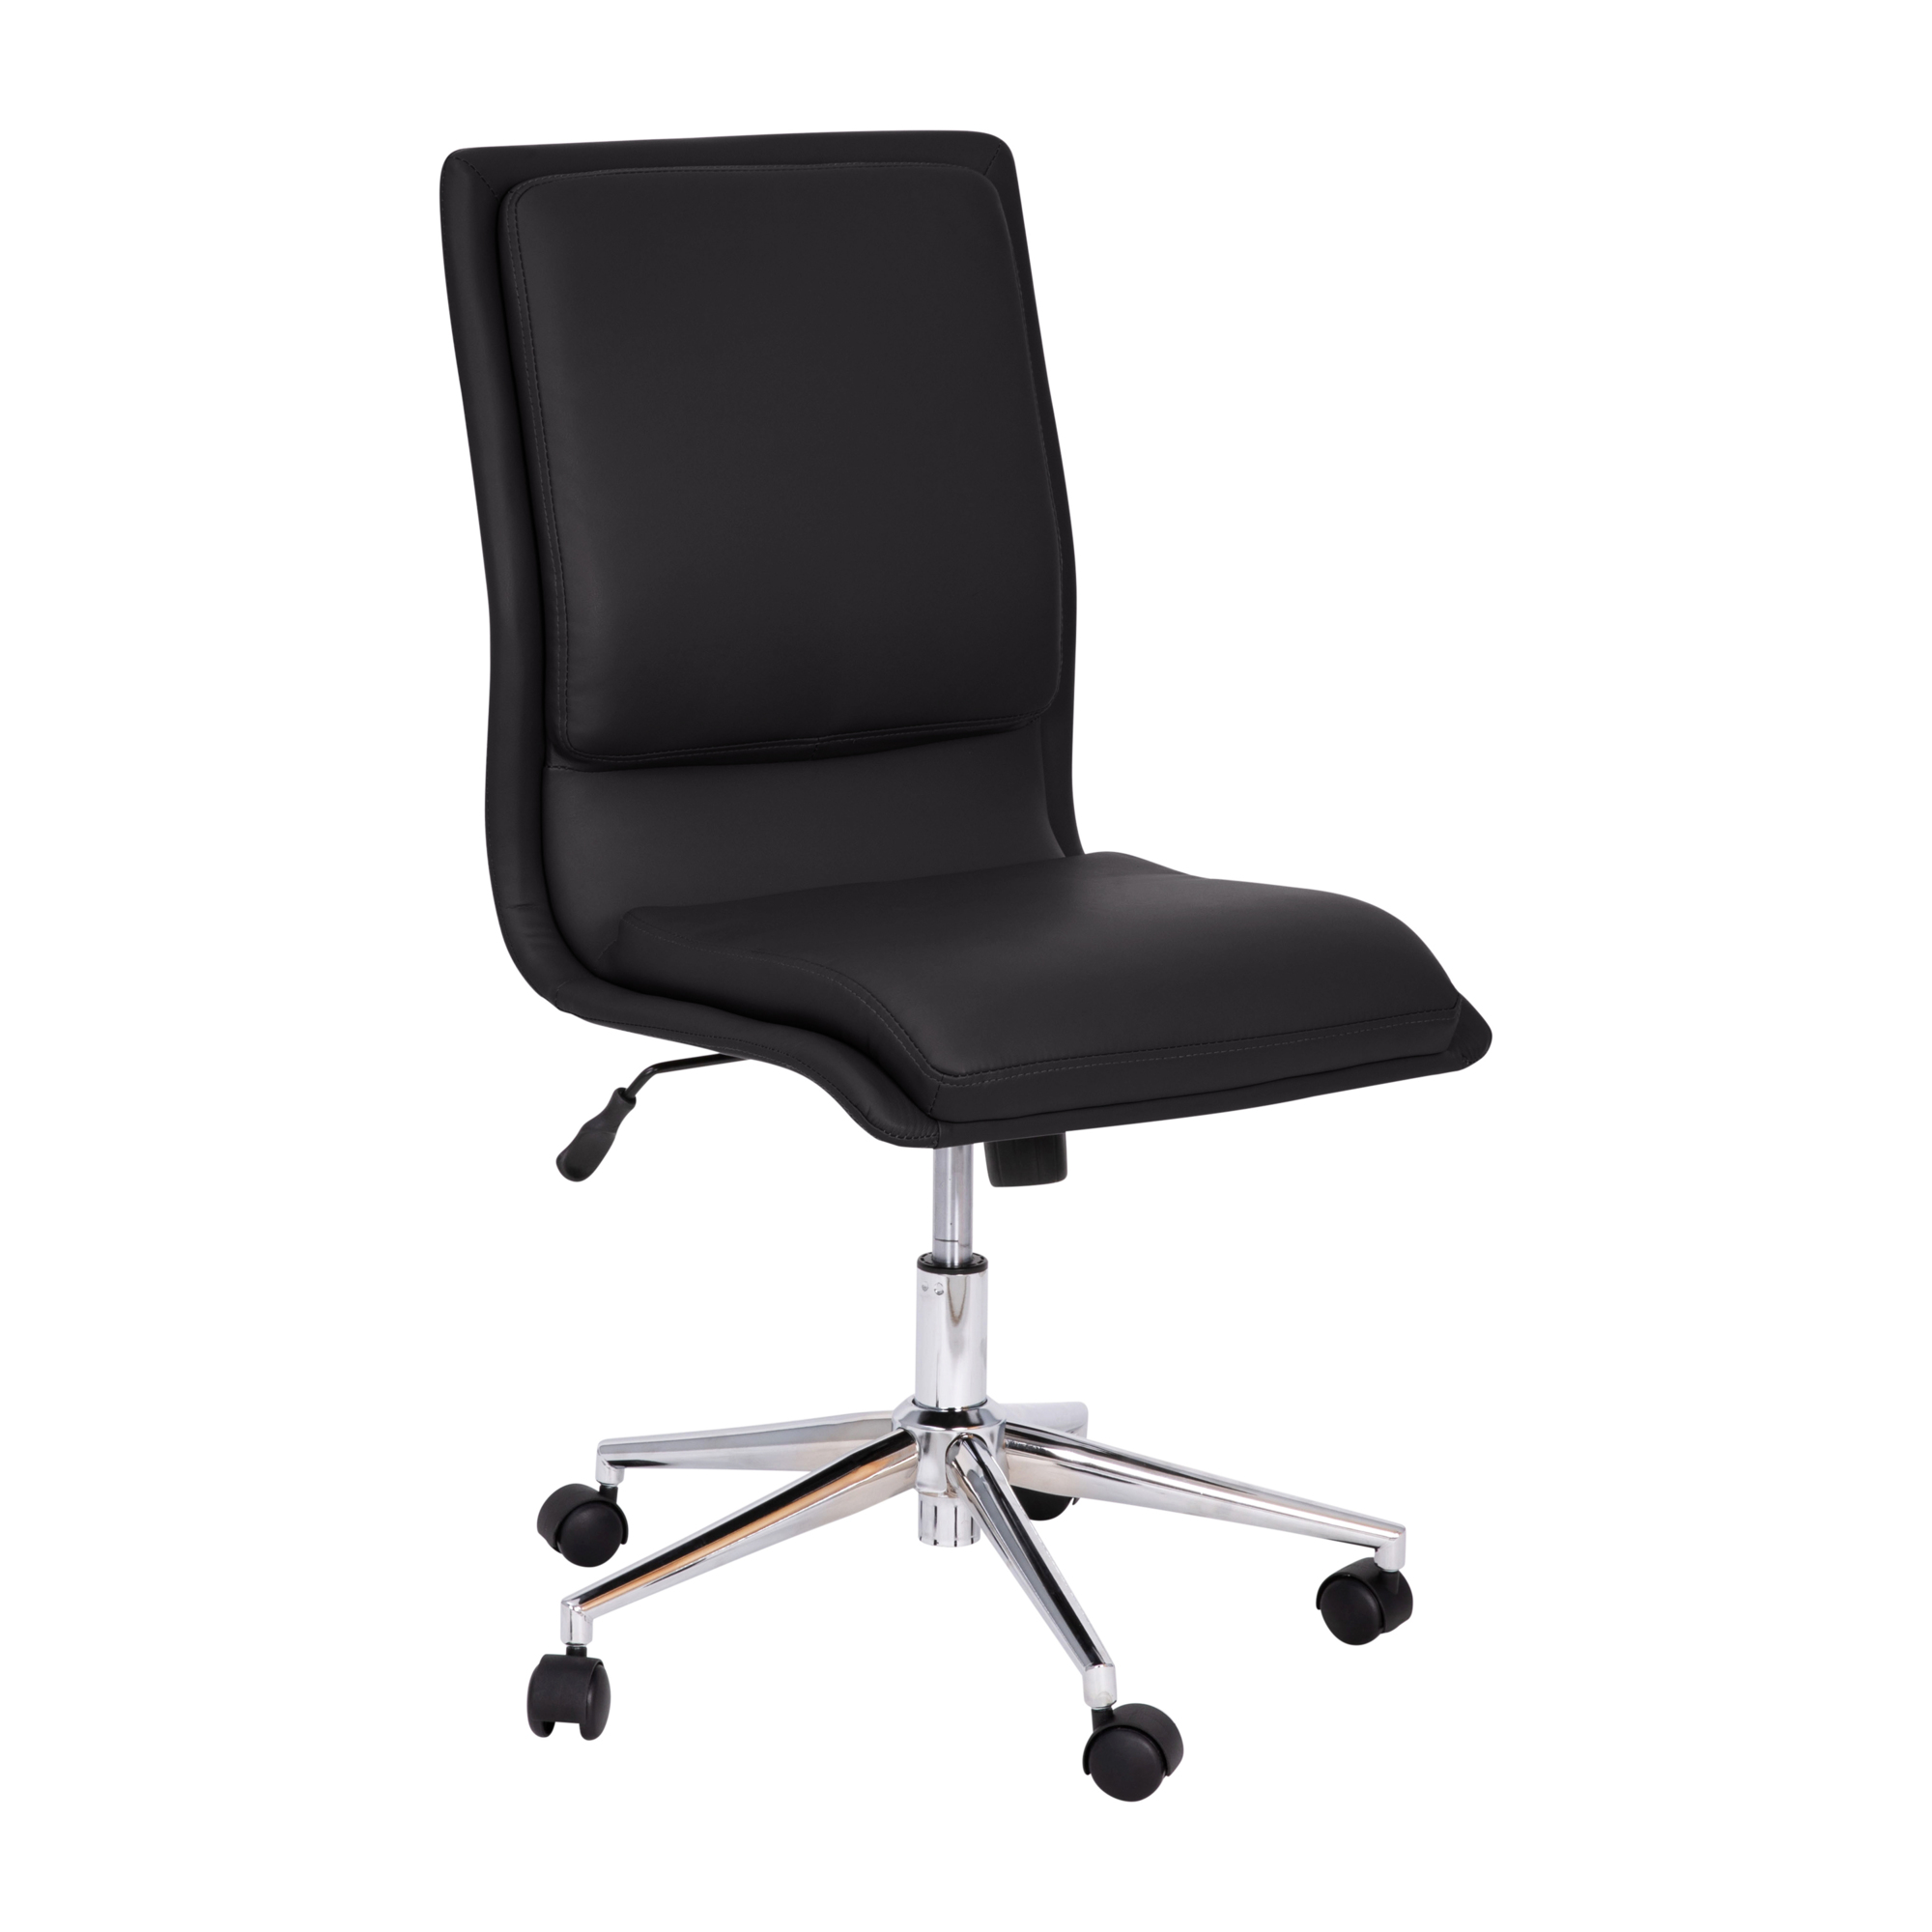 Flash Furniture, Black Mid-Back Armless LeatherSoft Office Chair, Primary Color Black, Included (qty.) 1, Model GO21111BK